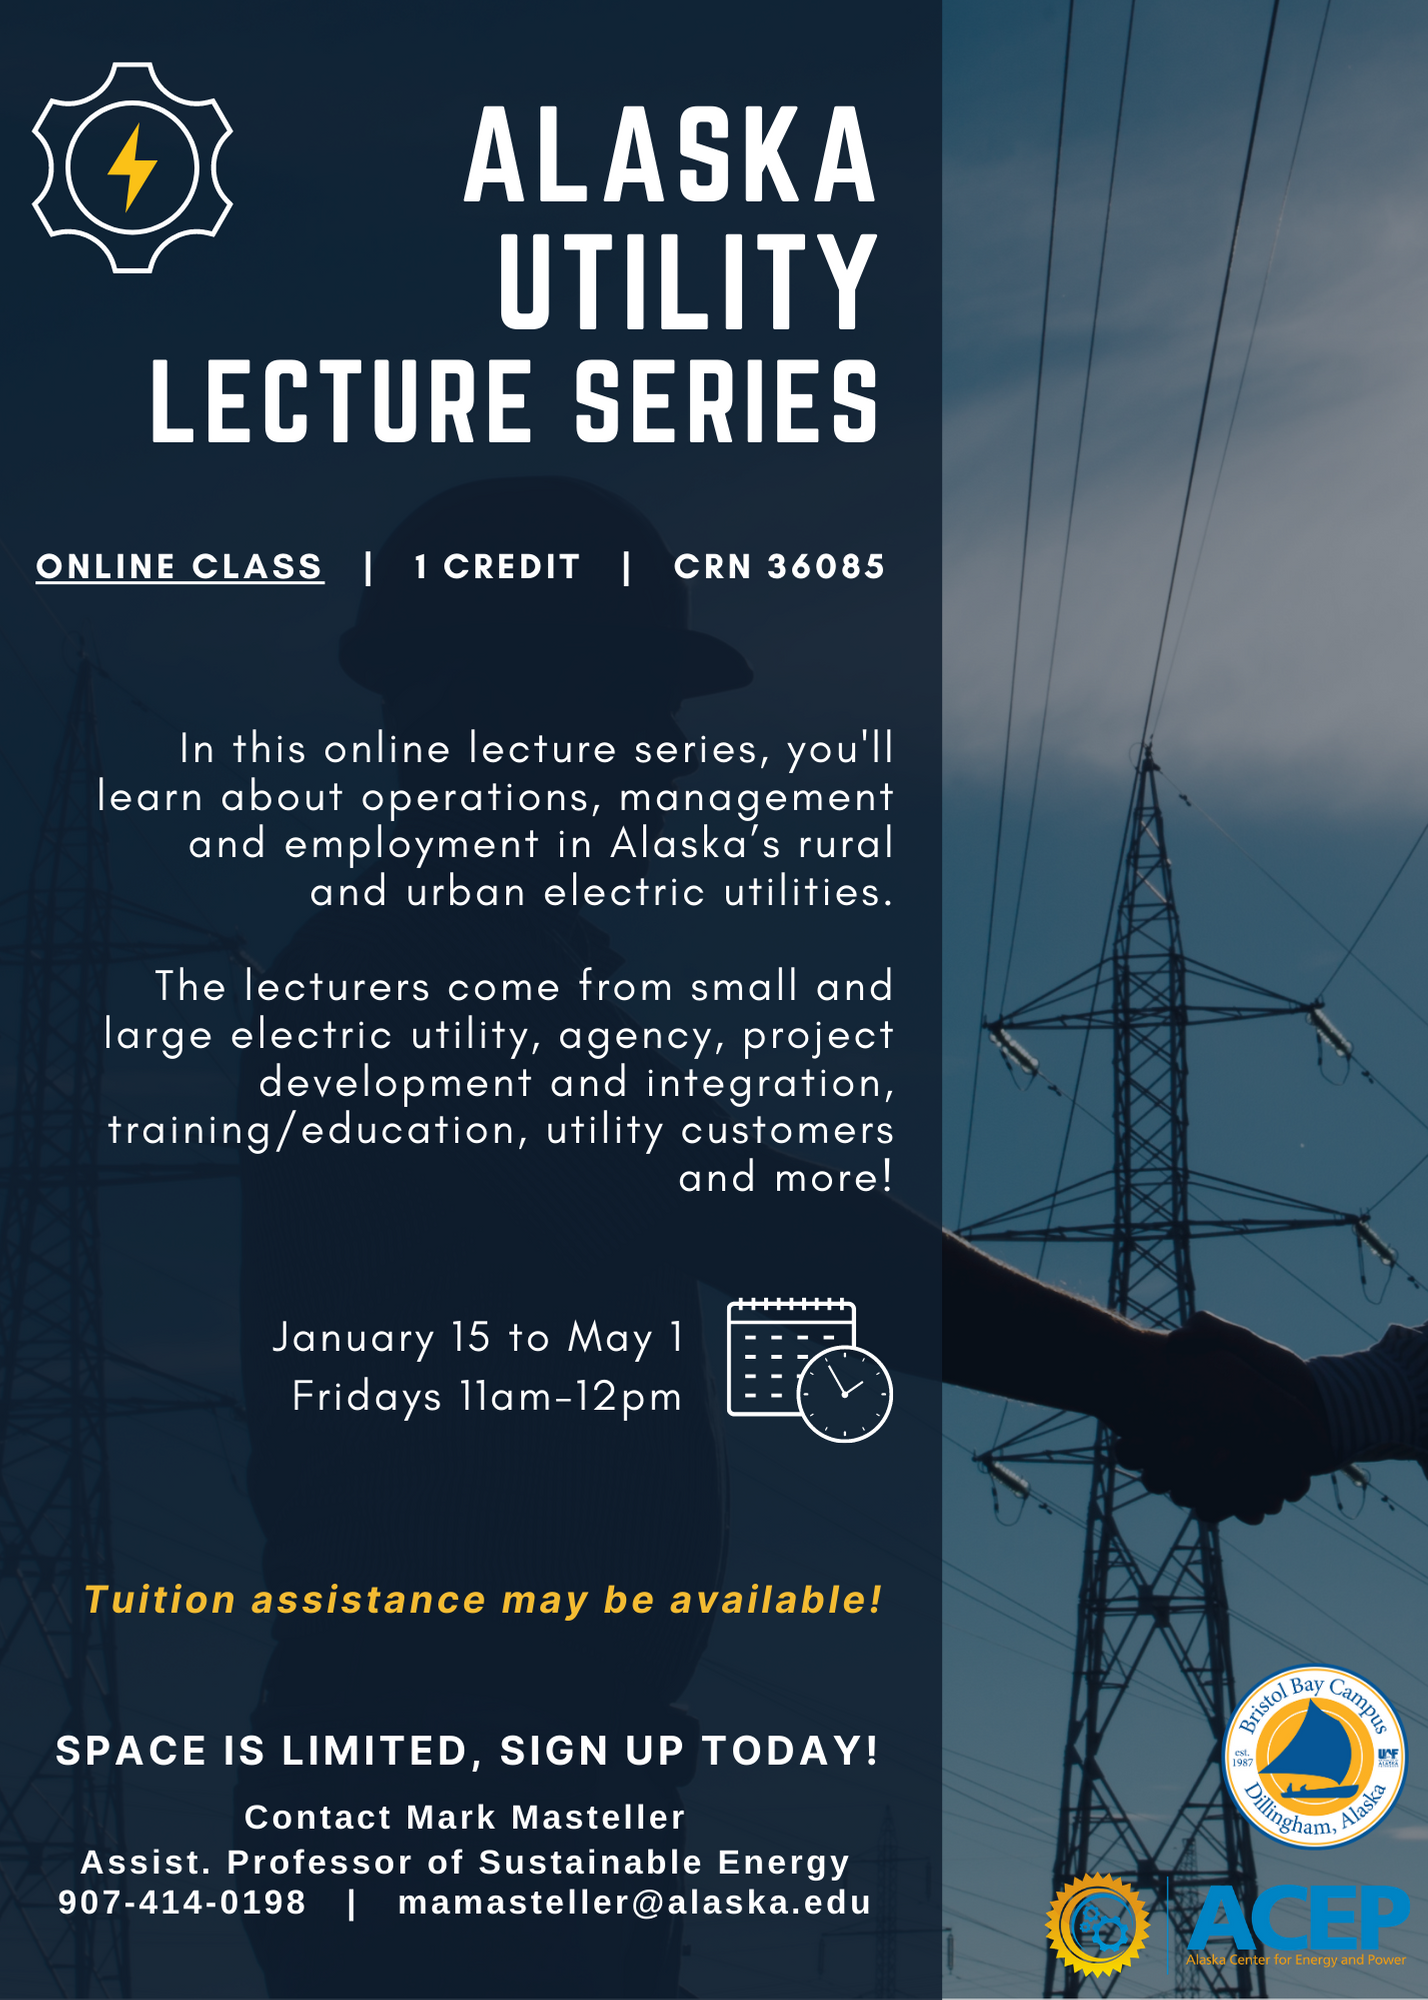 Start the New Year With a Utility Lecture Series